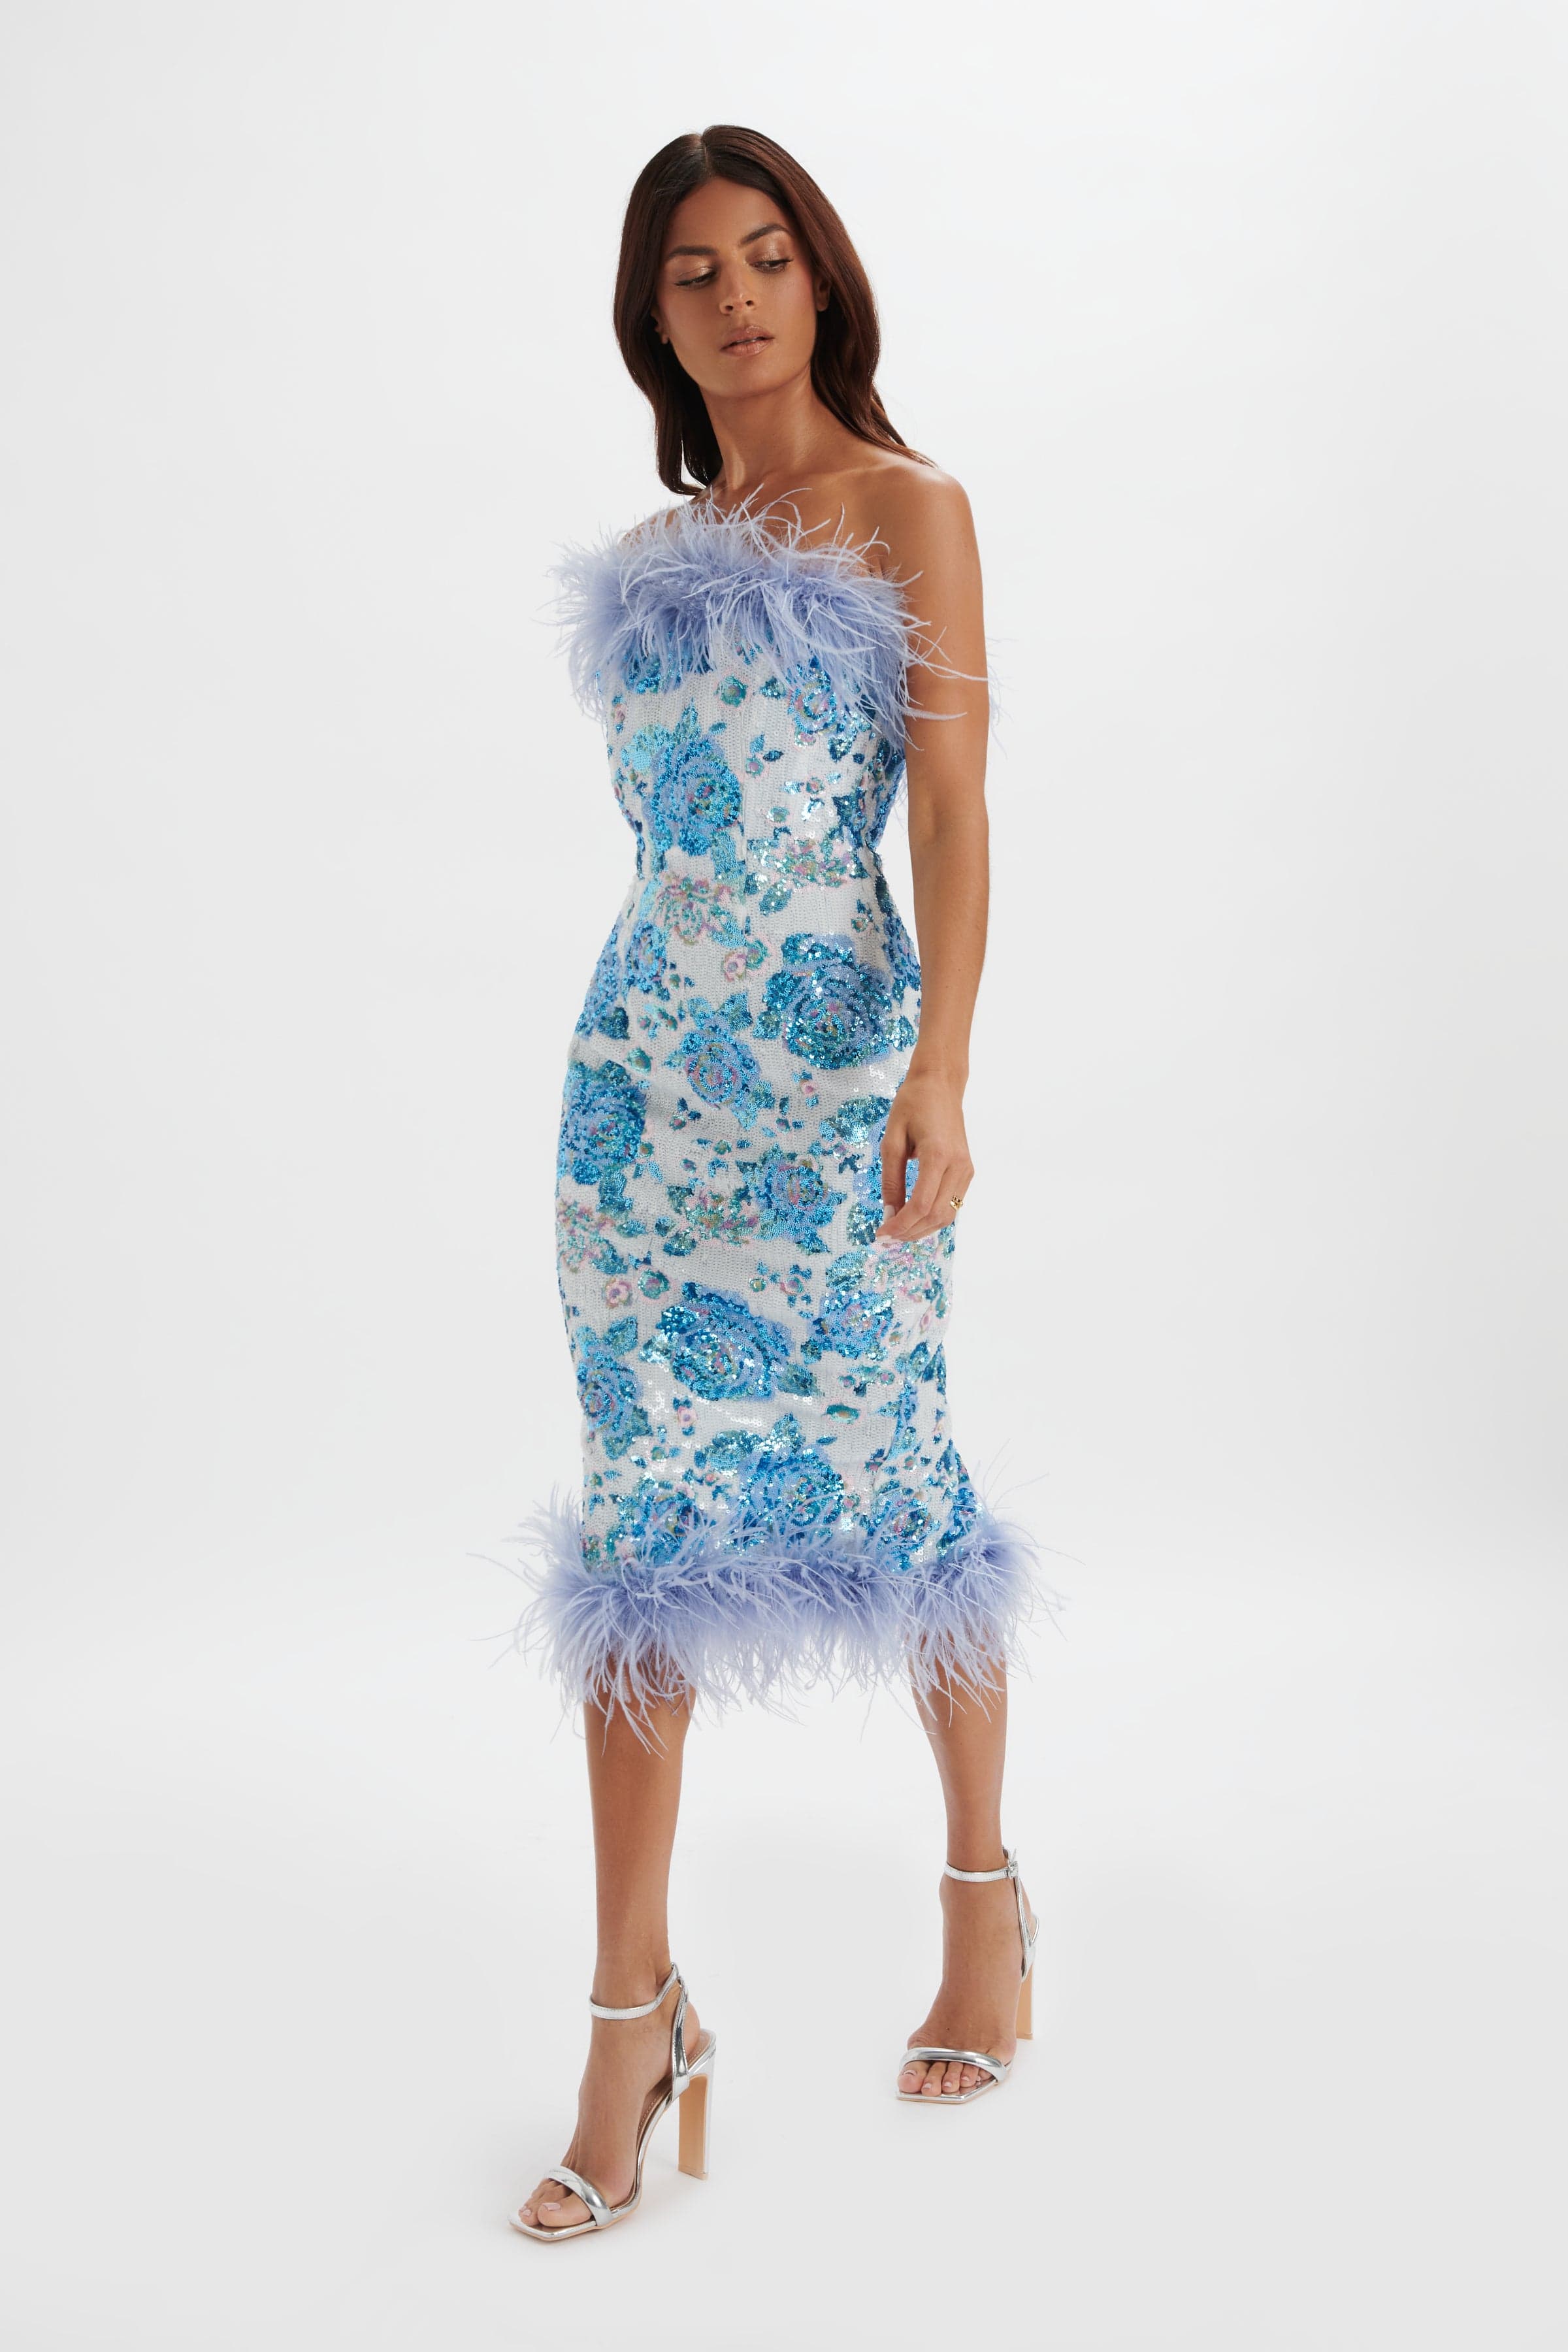 SAMI Feather Bandeau Midi Dress in White and Blue Rose Sequin